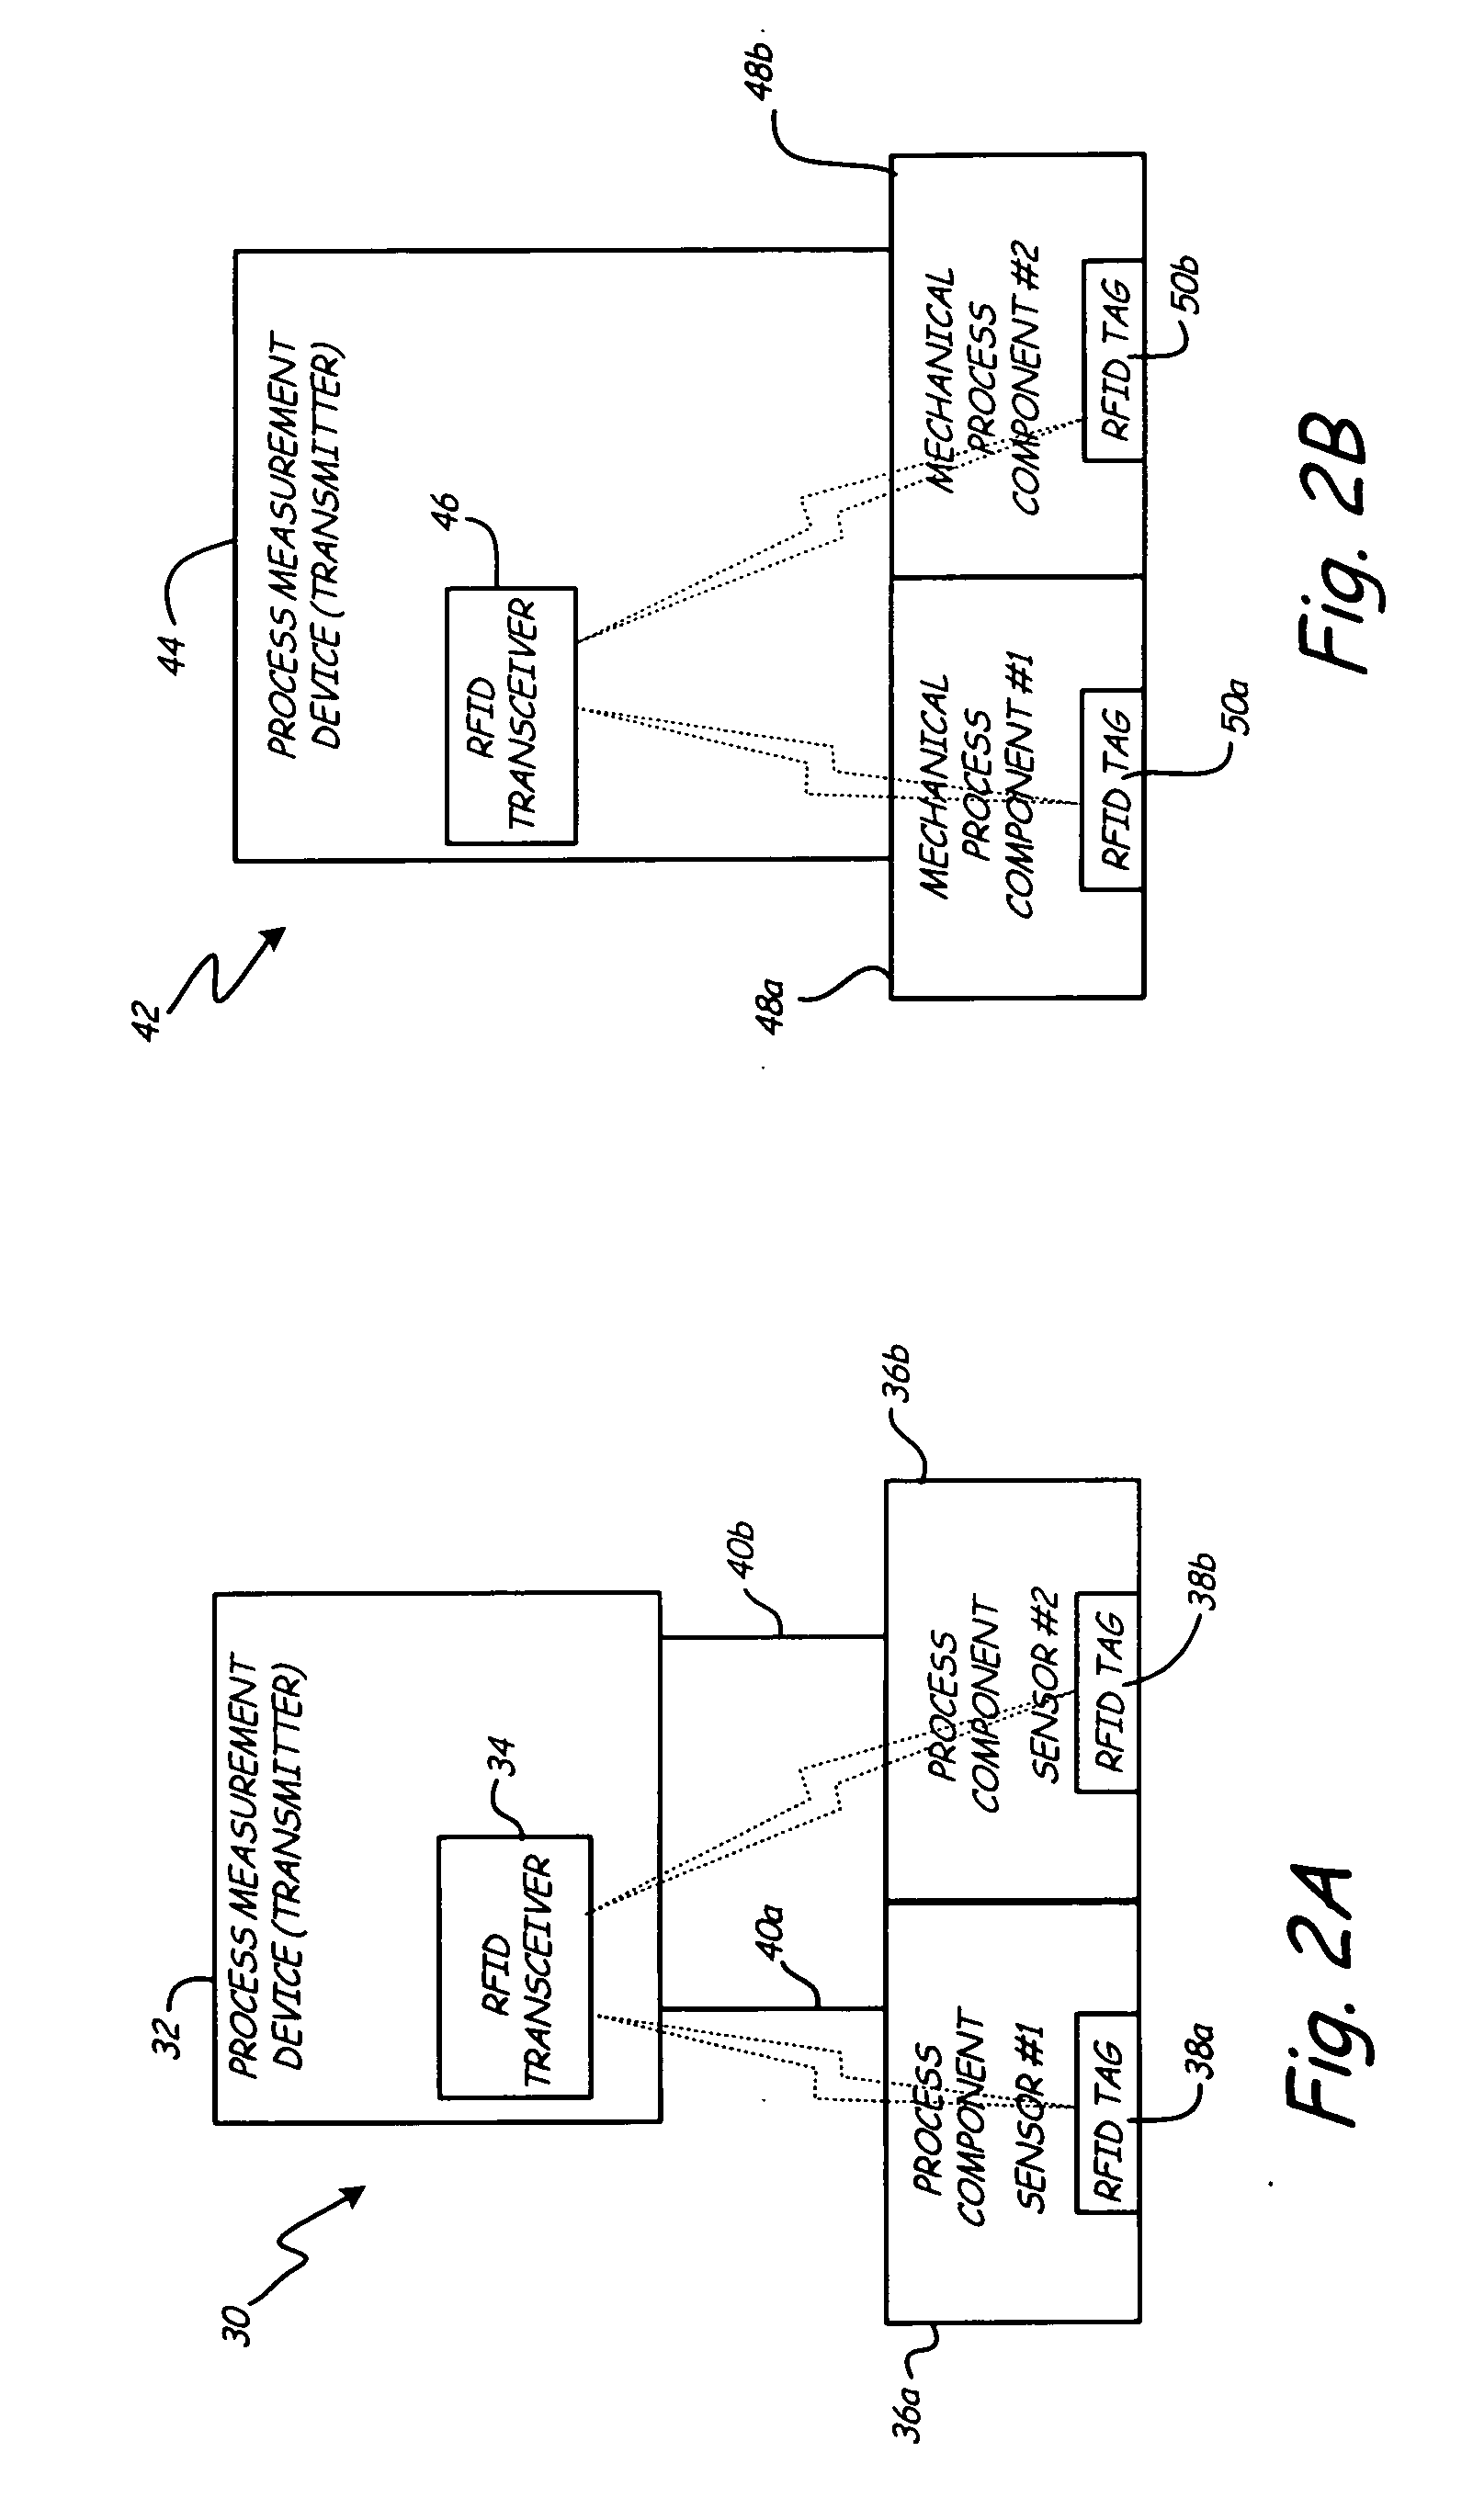 System and method for identification of process components